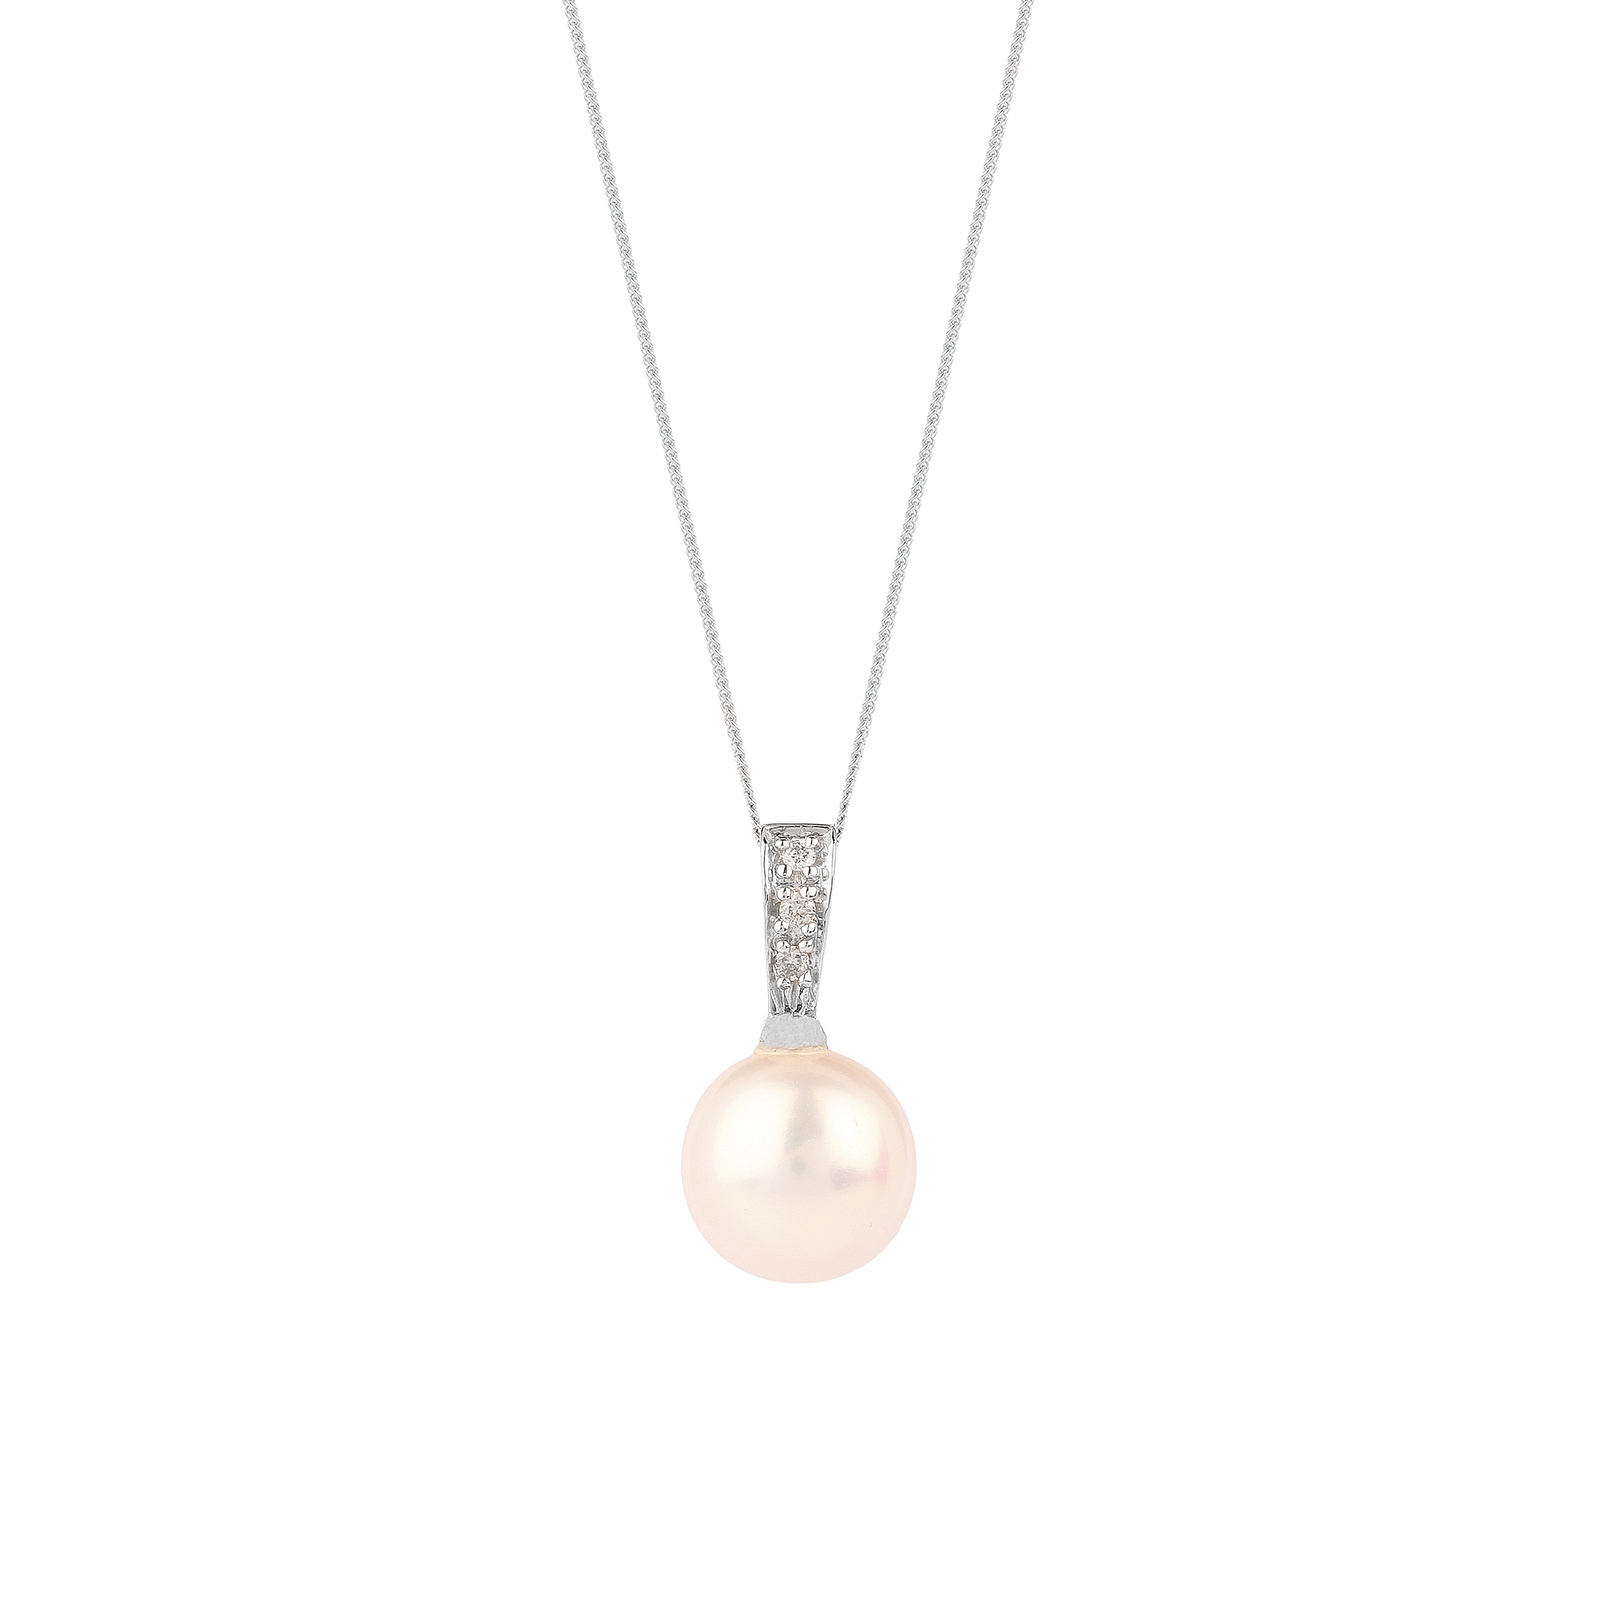 9ct White Gold 8.5-9.0mm Fresh Water Pearl Pendant | Gifts | Goldsmiths